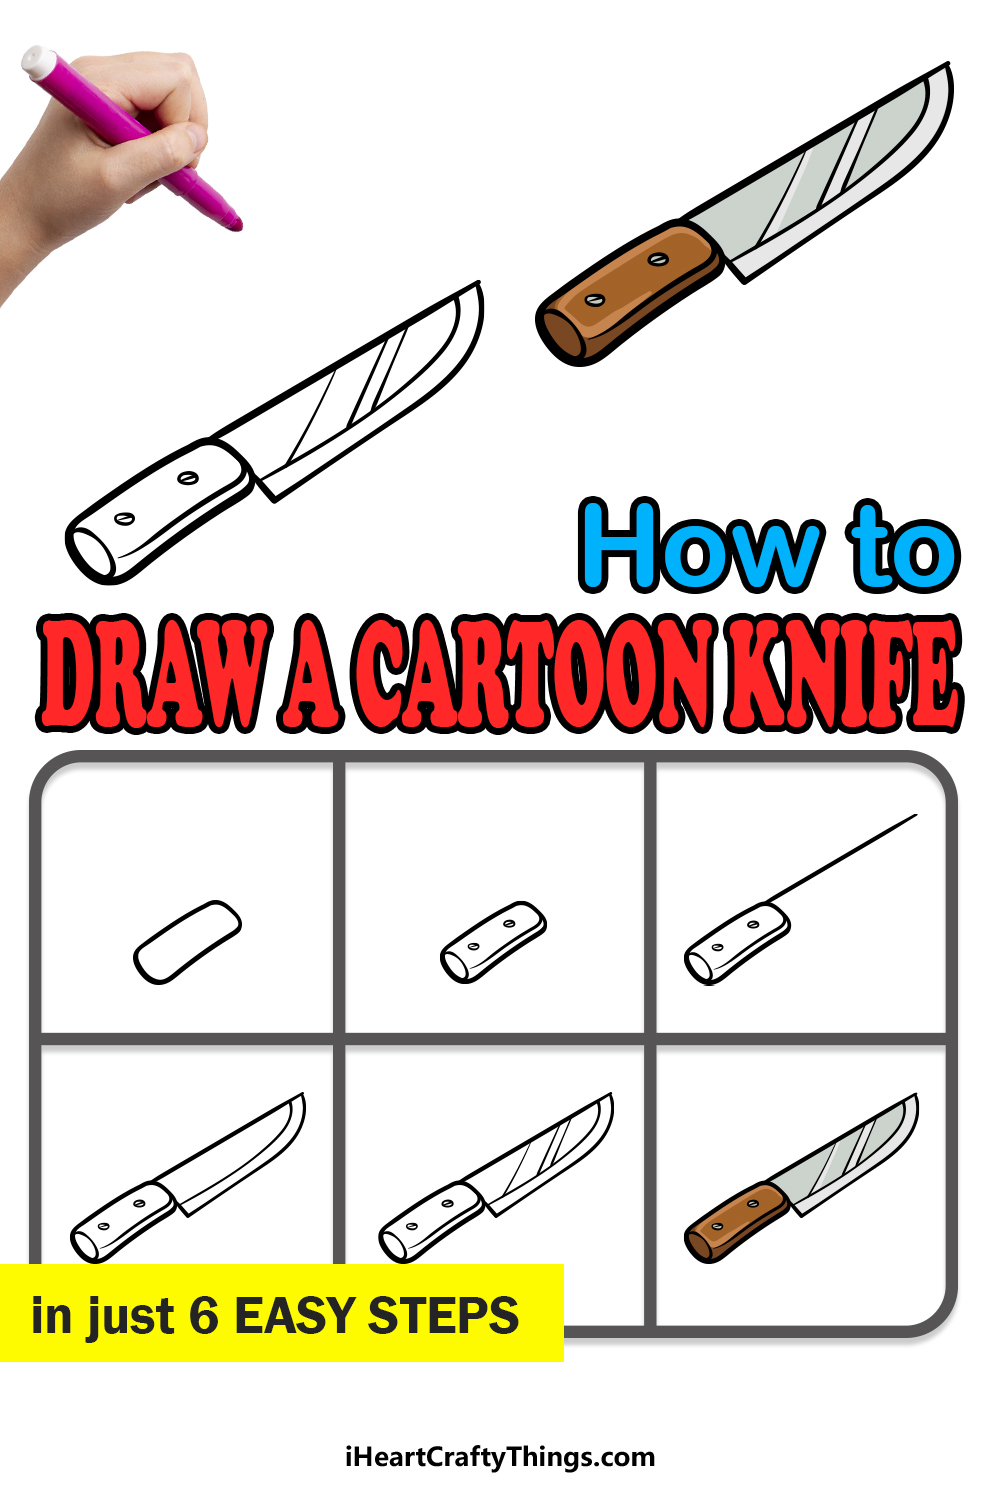 how to draw a cartoon knife in 6 easy steps